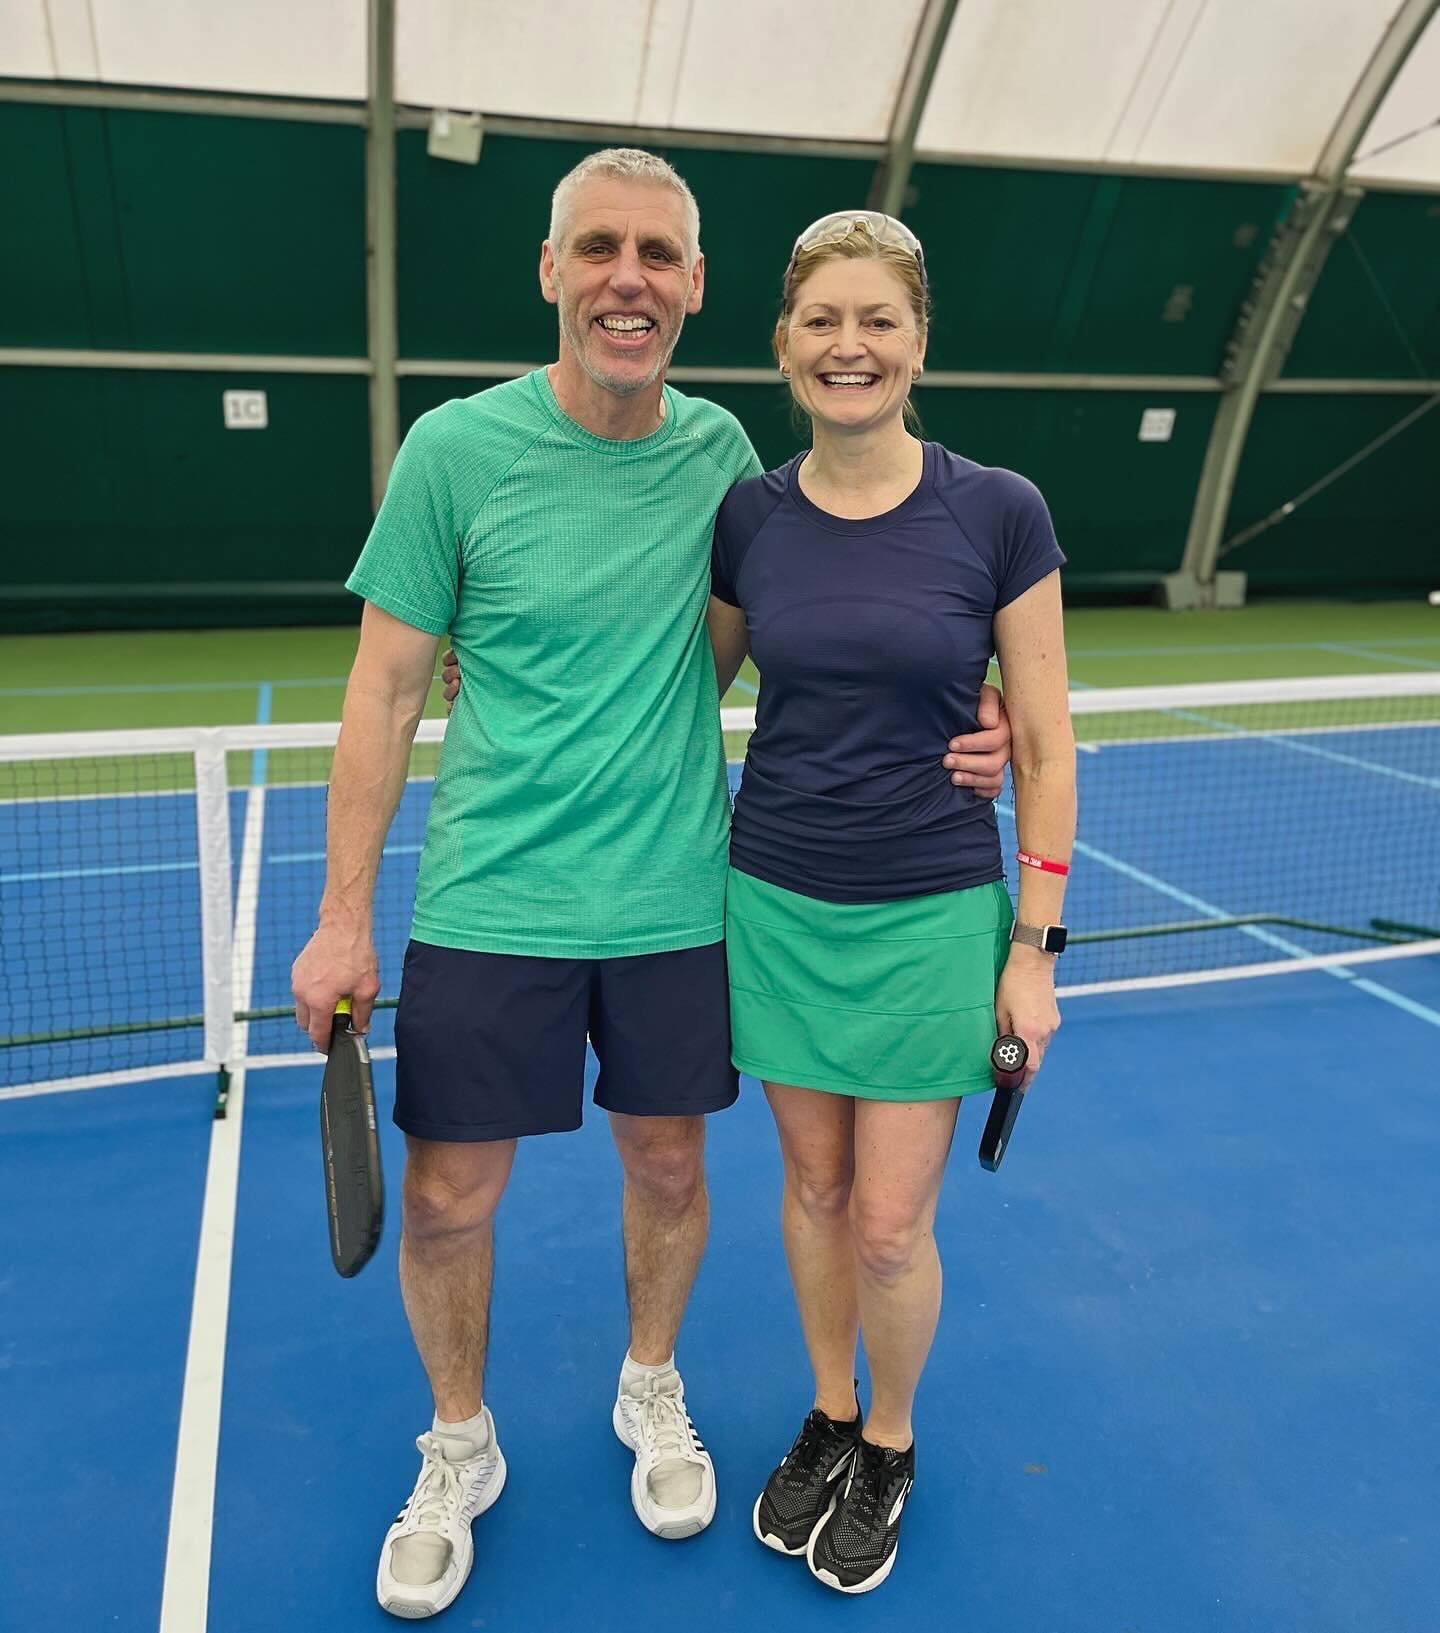 💛The WRC Mixed Doubles Spring Fling!💛

Here at the WRC, we are super excited to announce that we will be hosting a number of FUN, one day tournaments this season to provide more friendly competitions for our passionate + growing pickleball communit